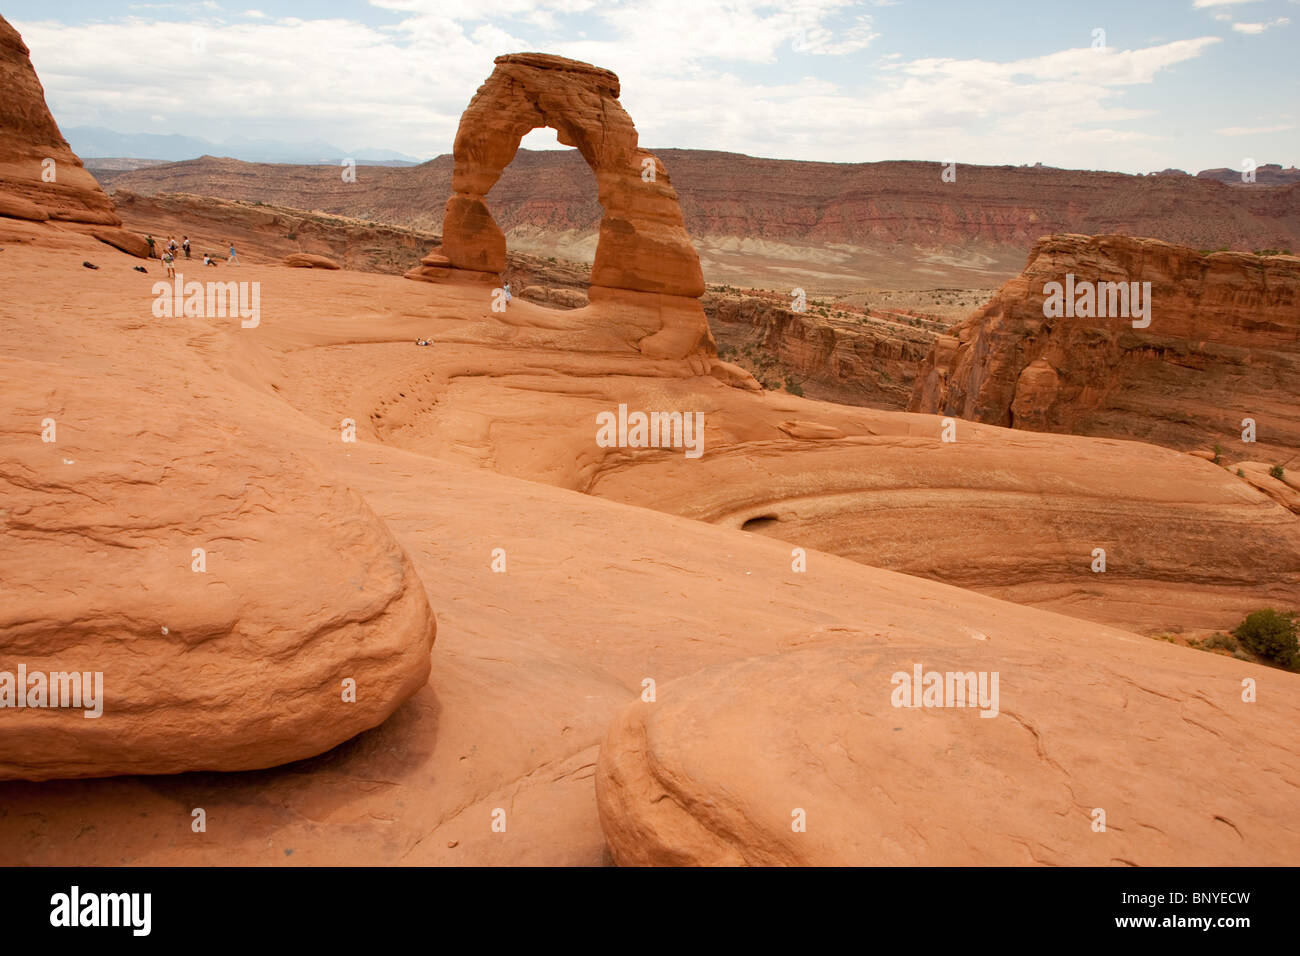 Rocks near Delicate Arch, Arches National Park, Utah, USA Stock Photo